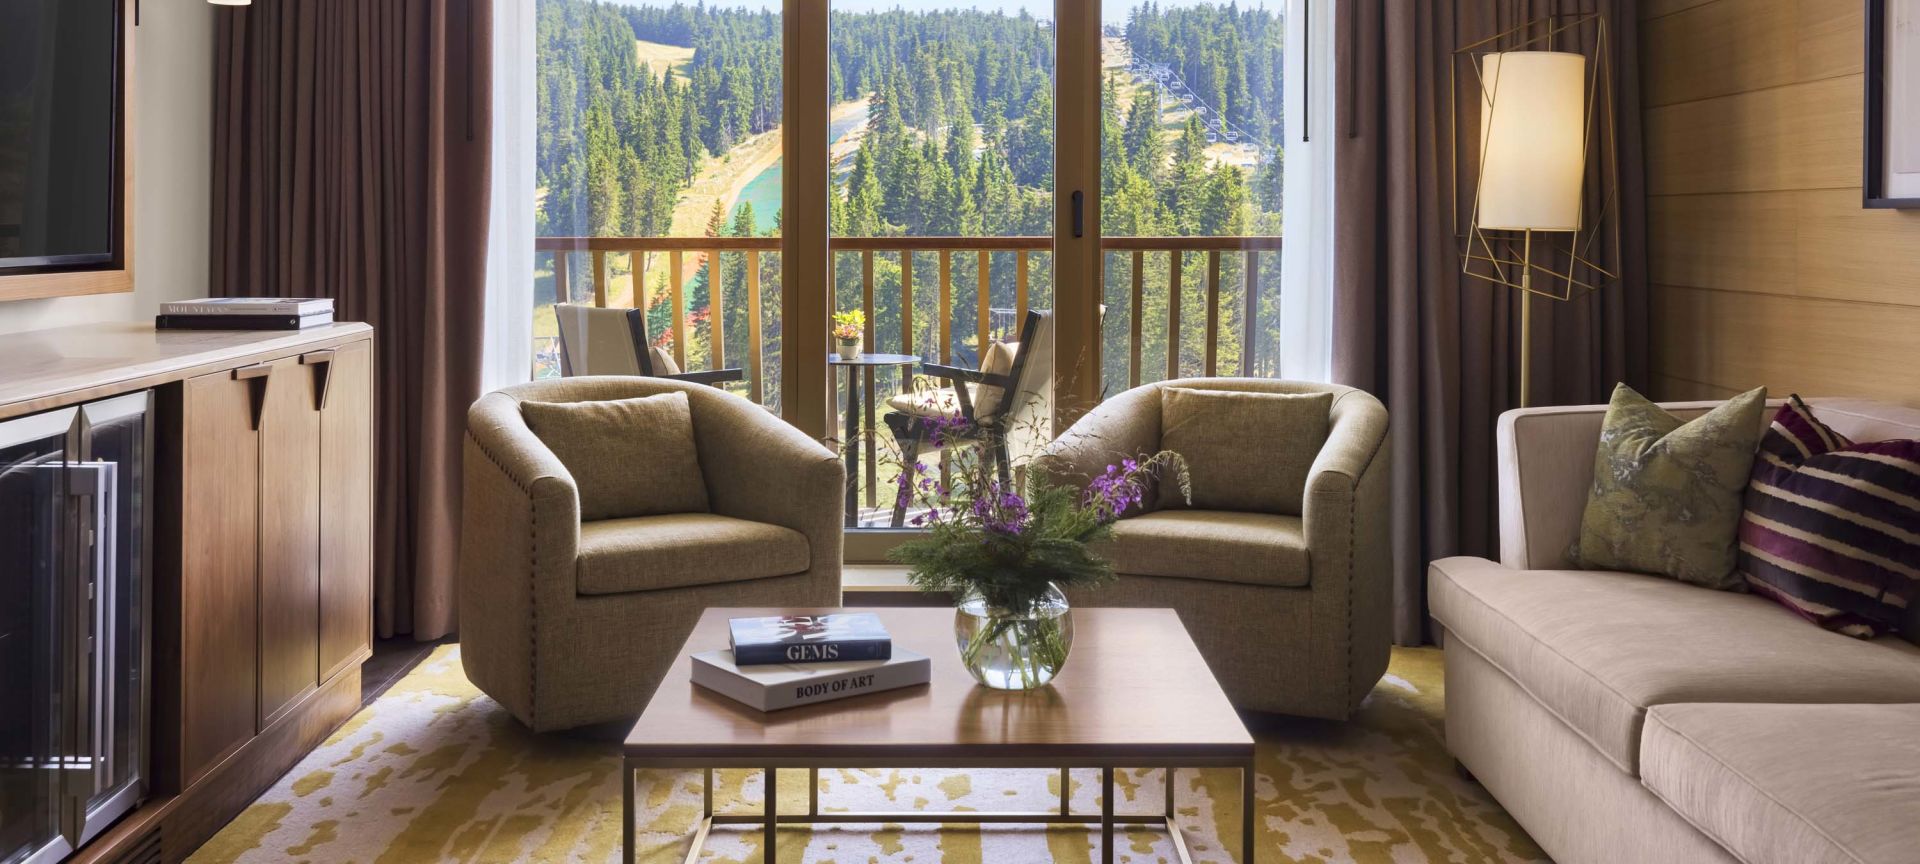 Karaman Suite living area with mountain view